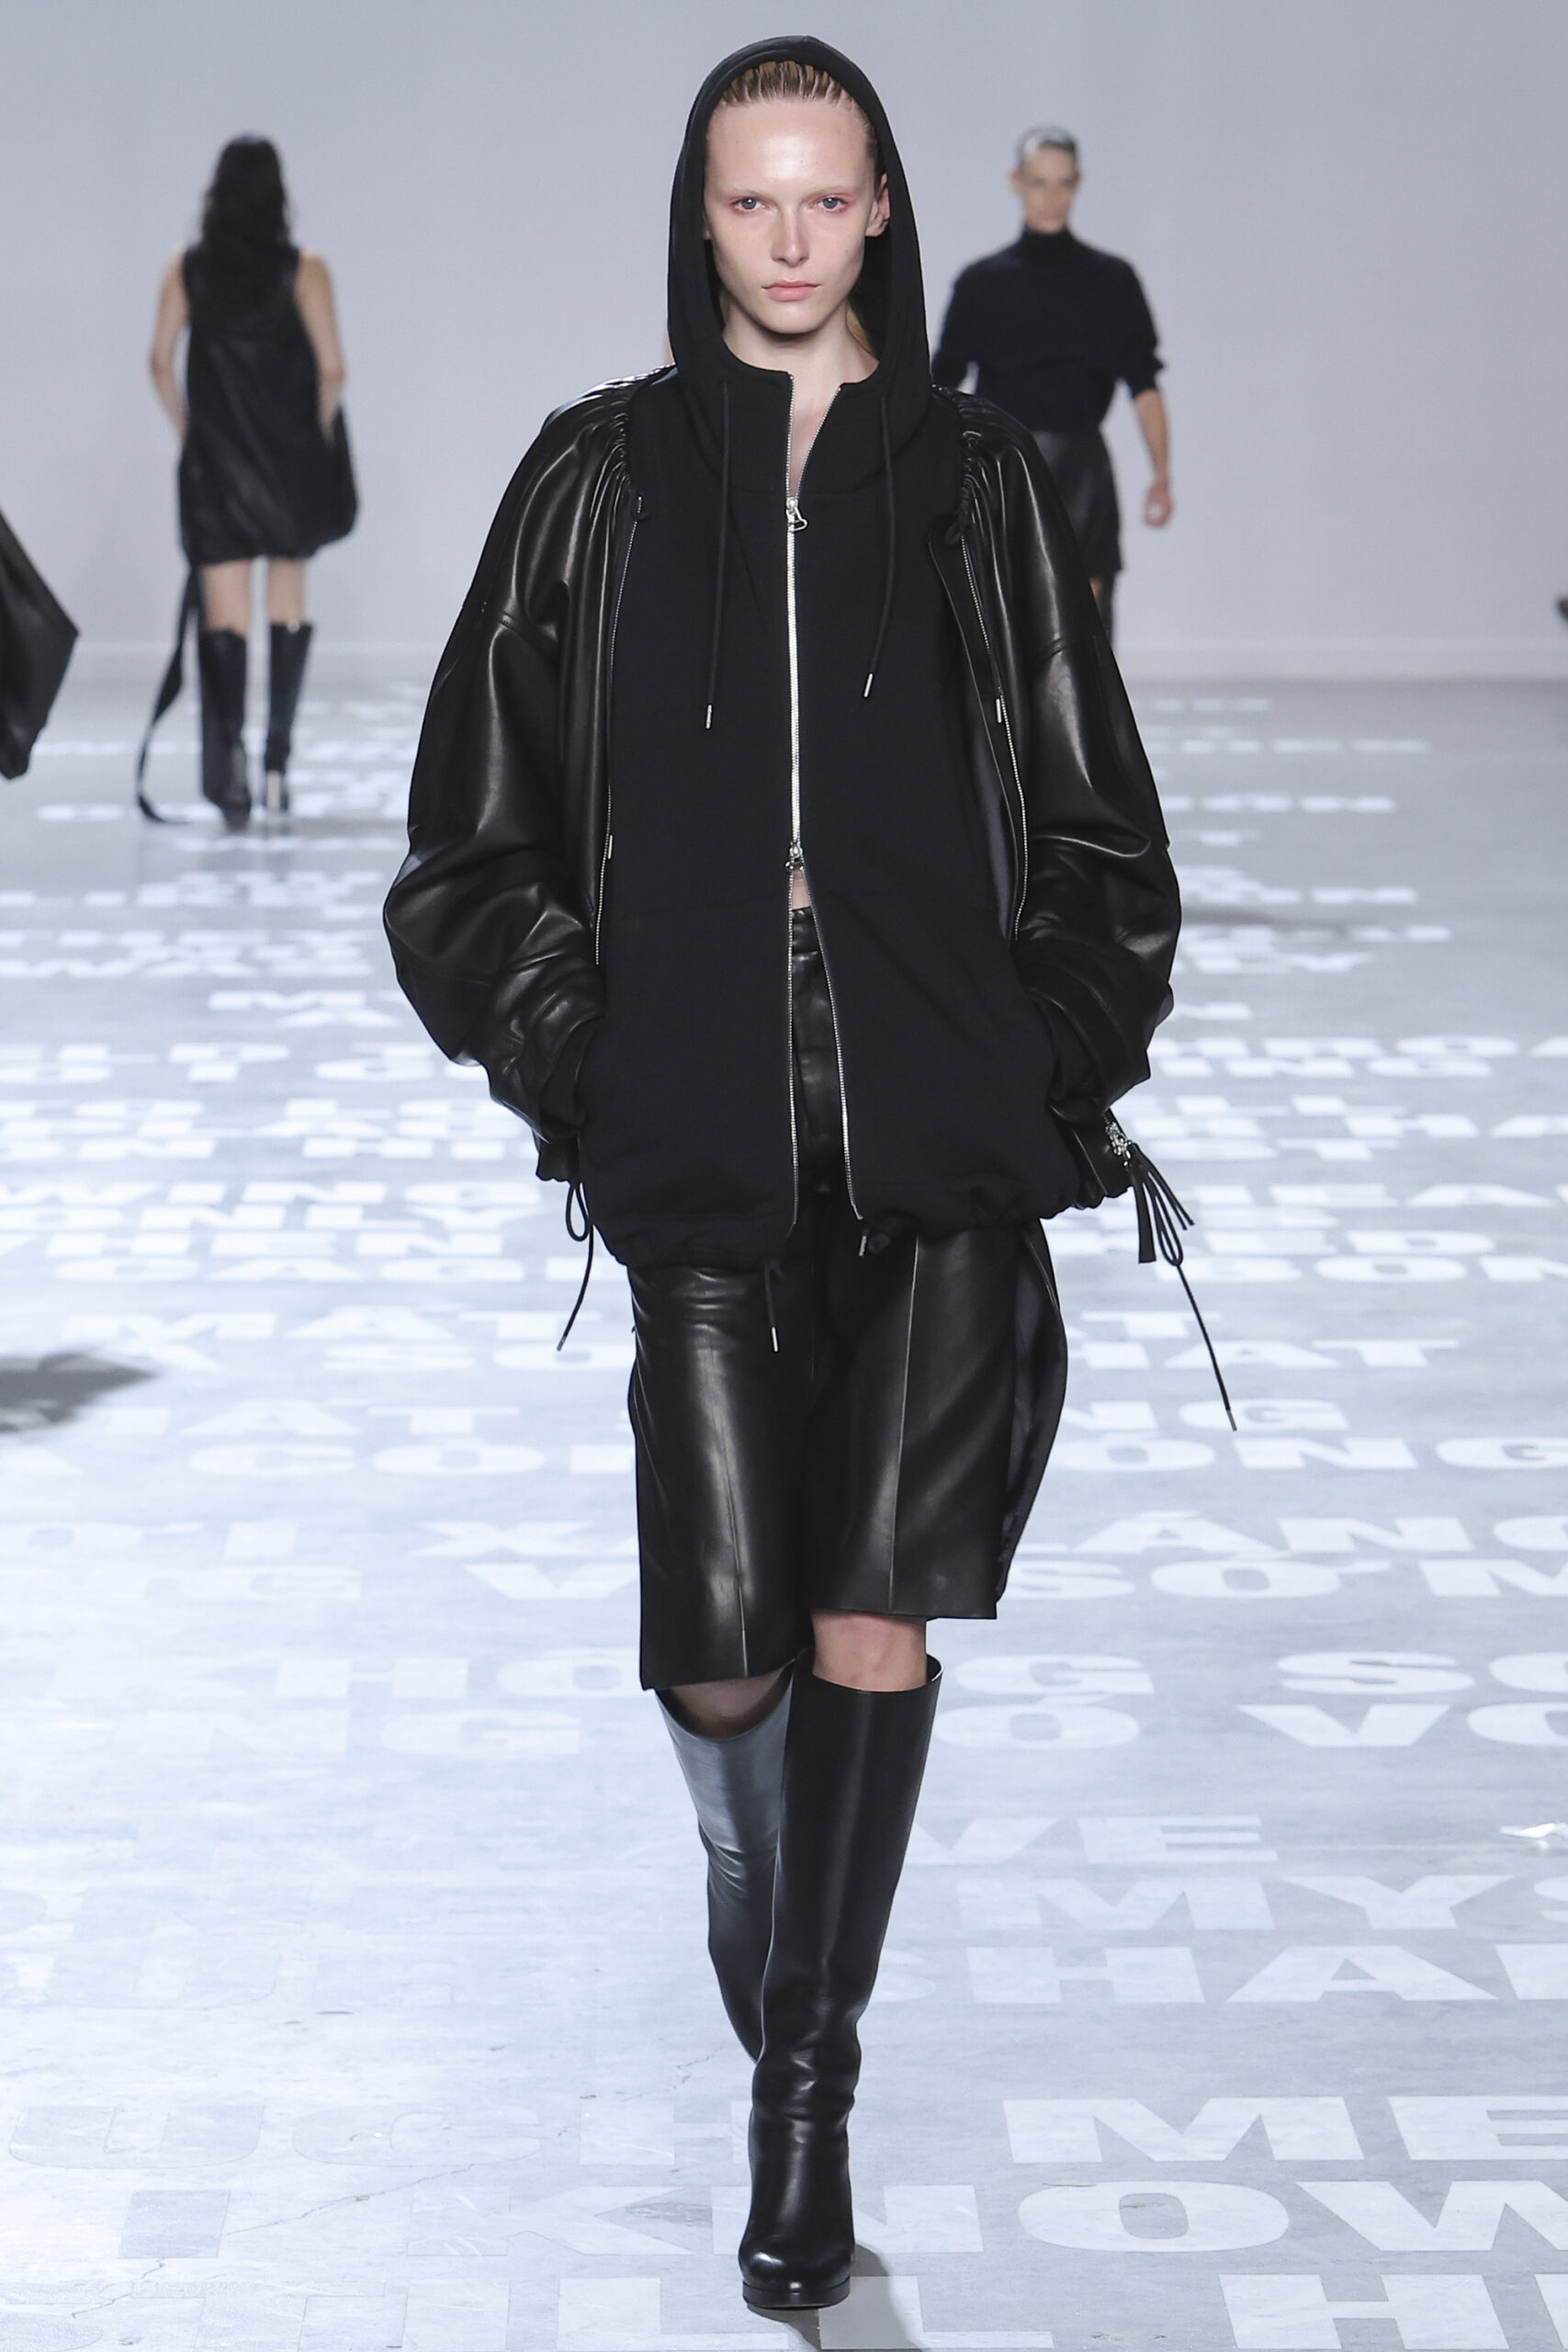 At Helmut Lang, Peter Do Isn't Worried About Pleasing Everybody